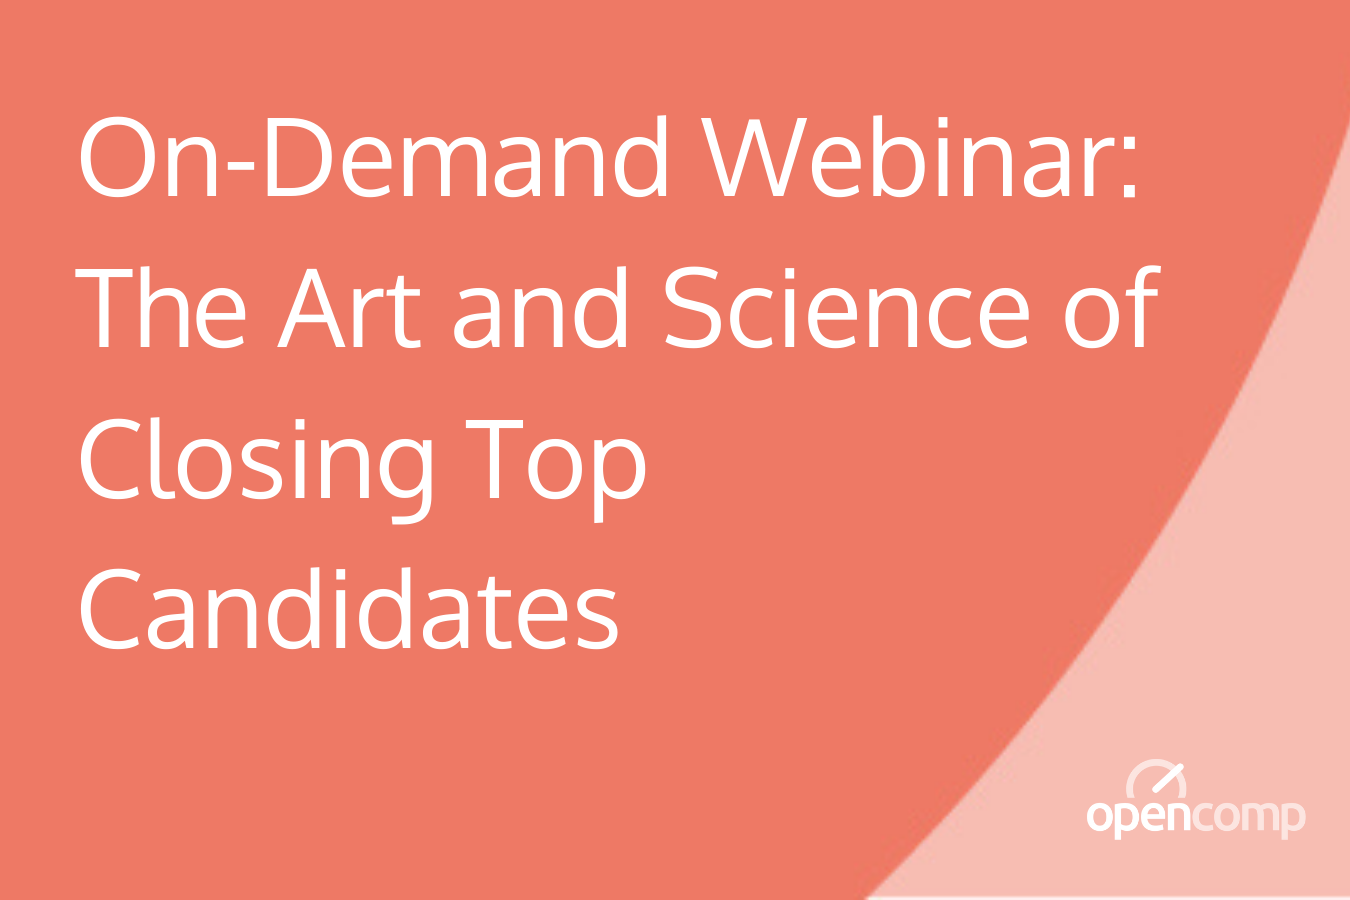 On-Demand Webinar_ The Art and Science of Closing Top Candidates